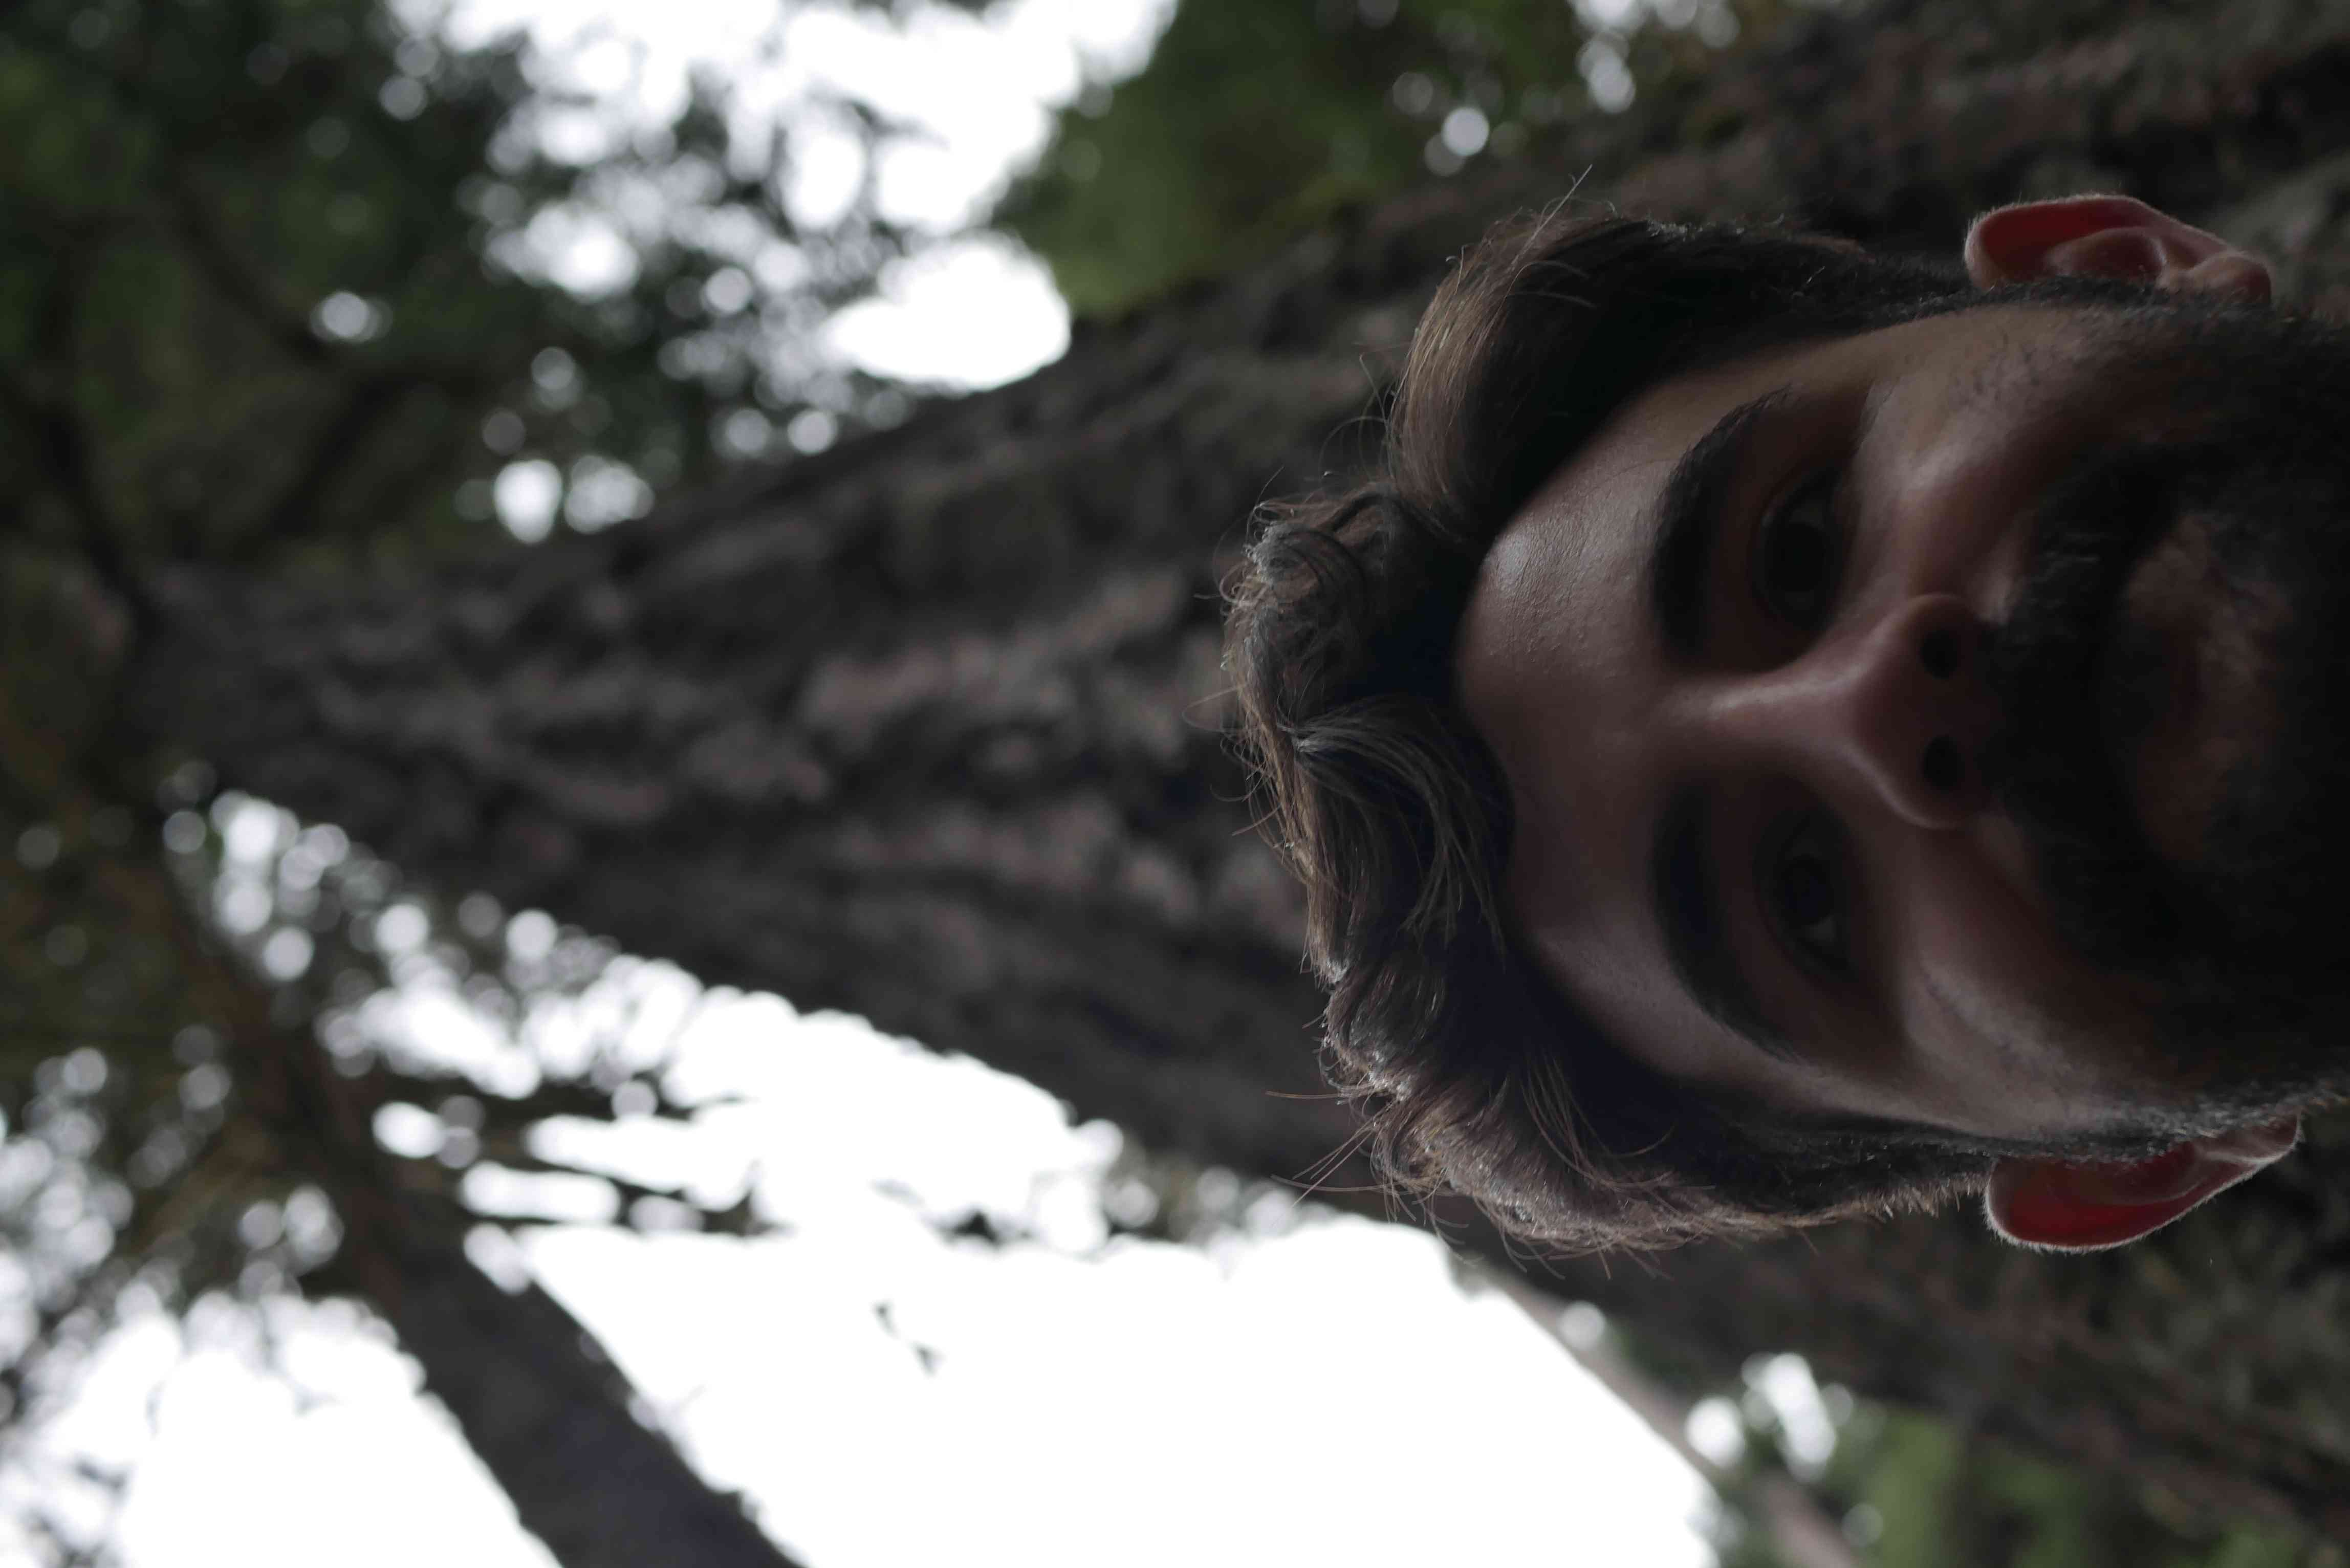 A picture of tony mannino by a tree in the woods.